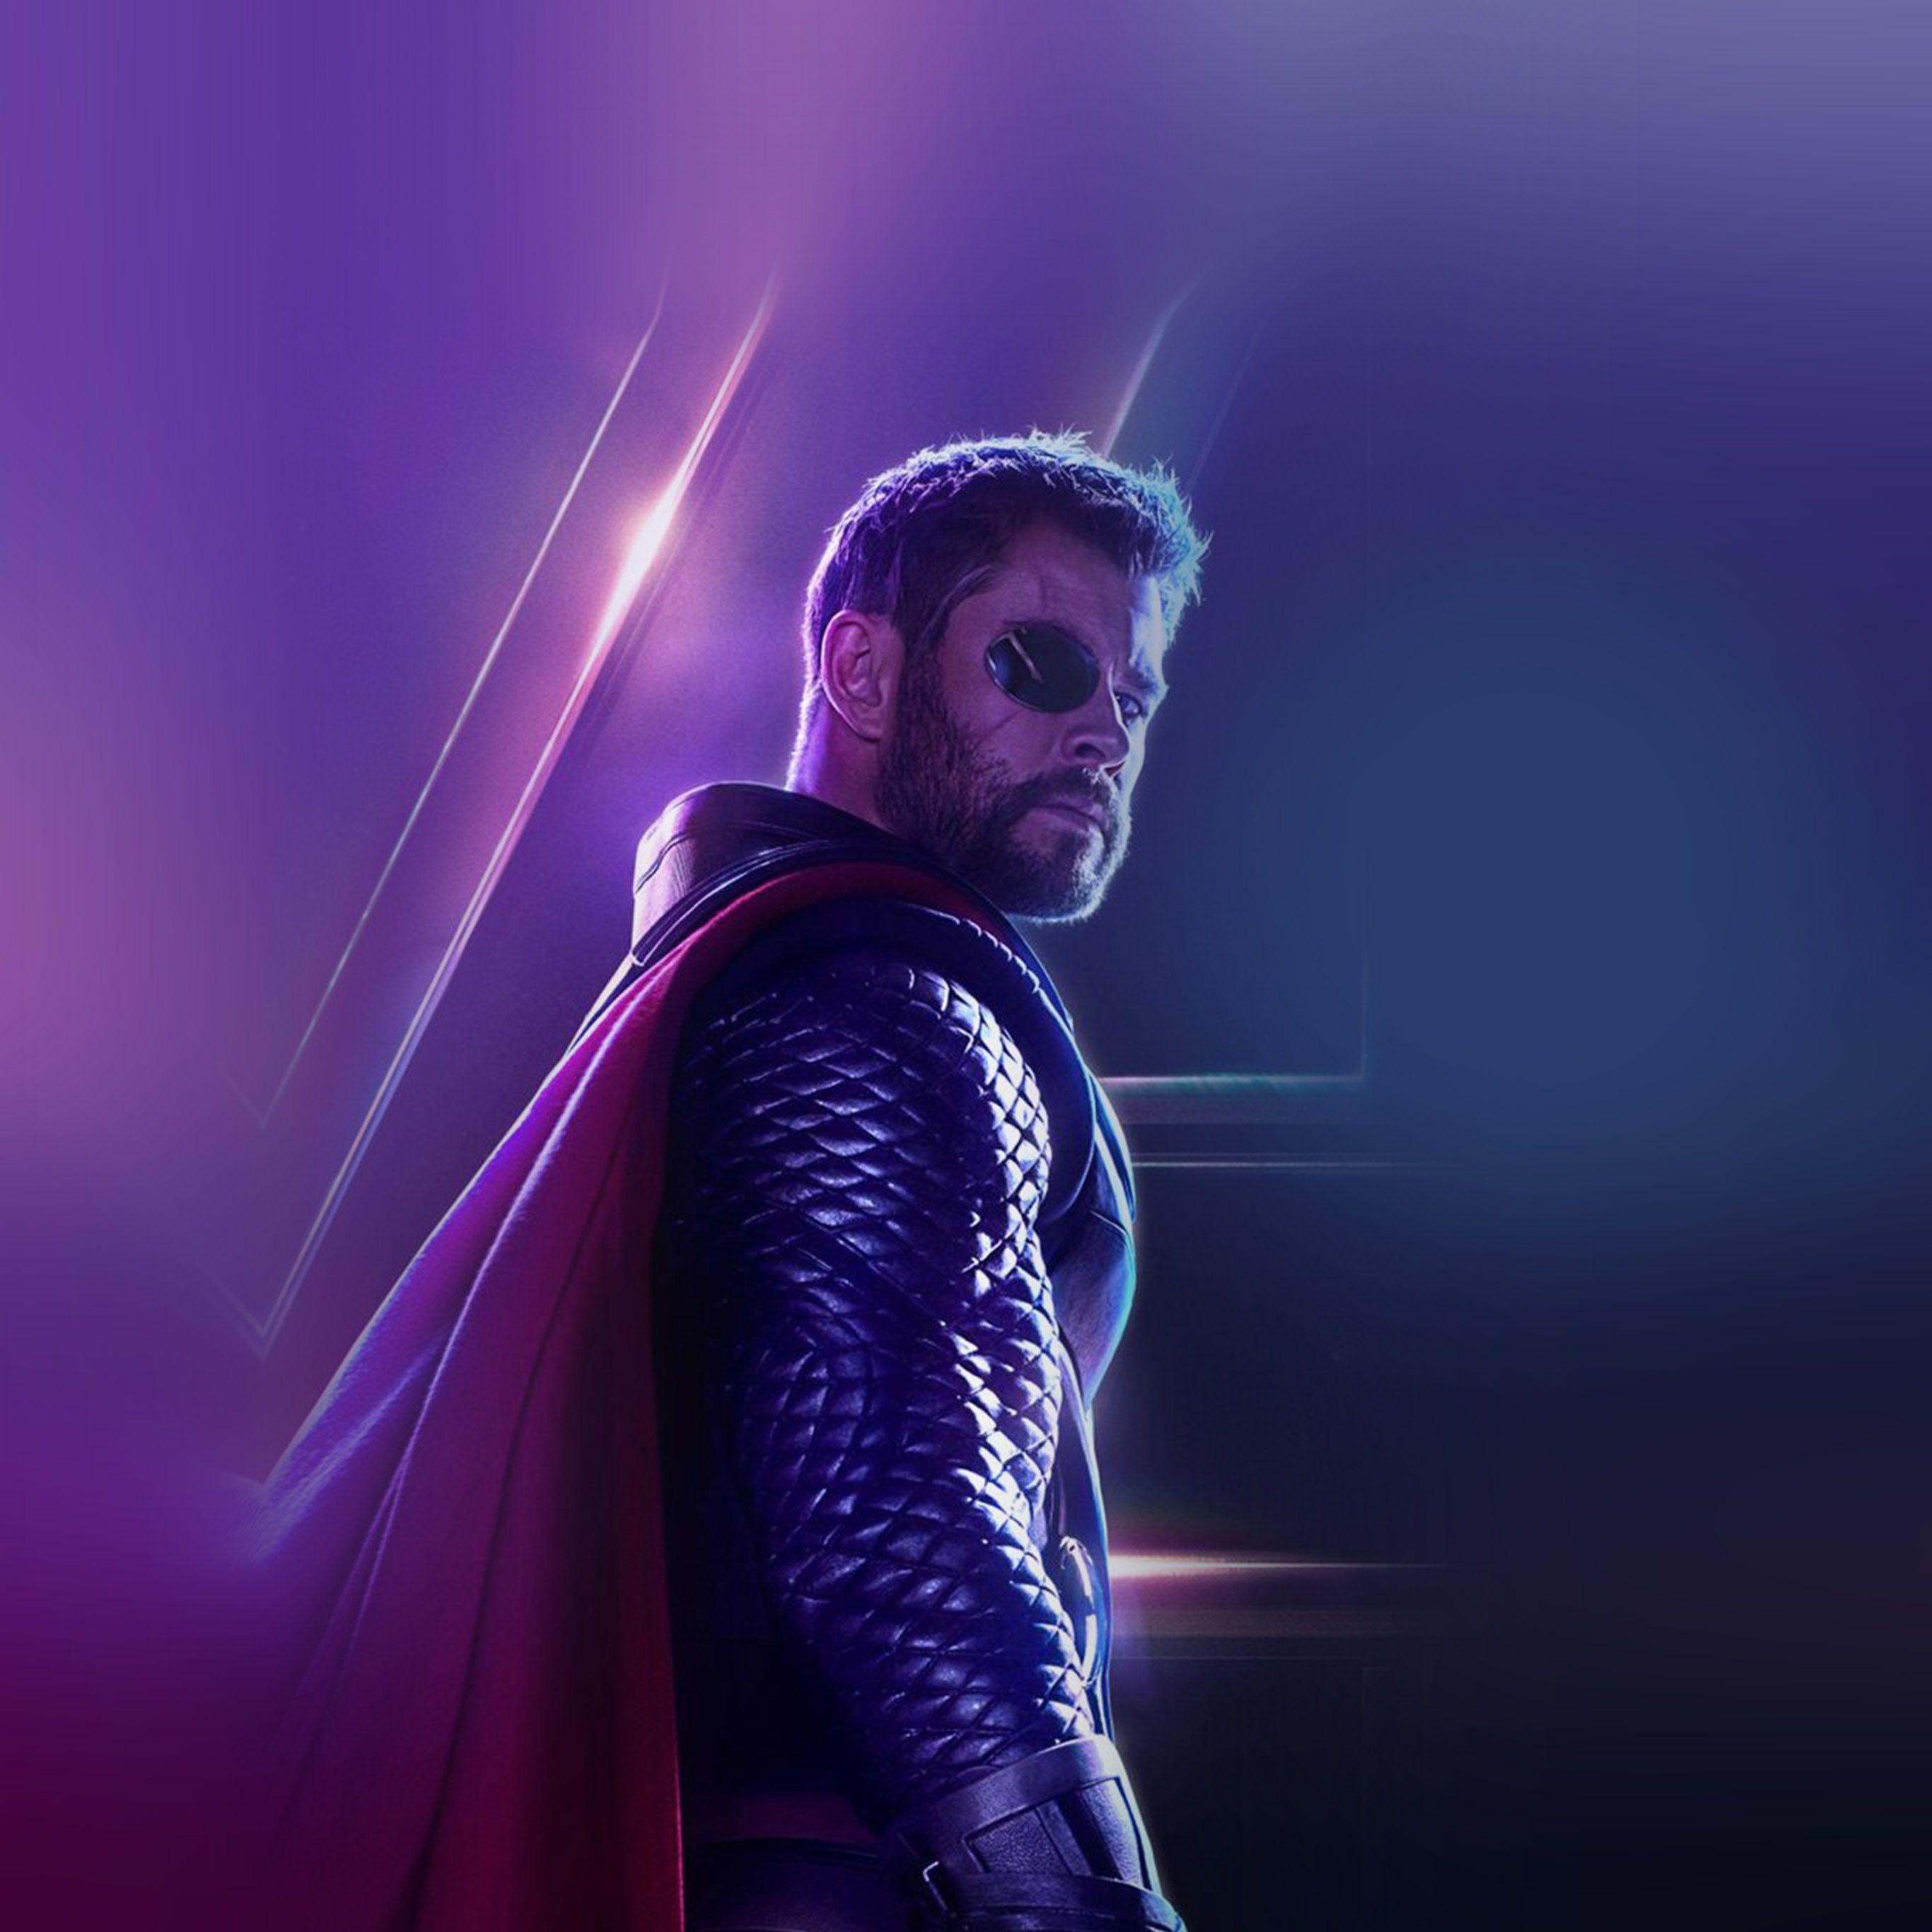 Thor Wallpaper For Android , Find HD Wallpaper For Free